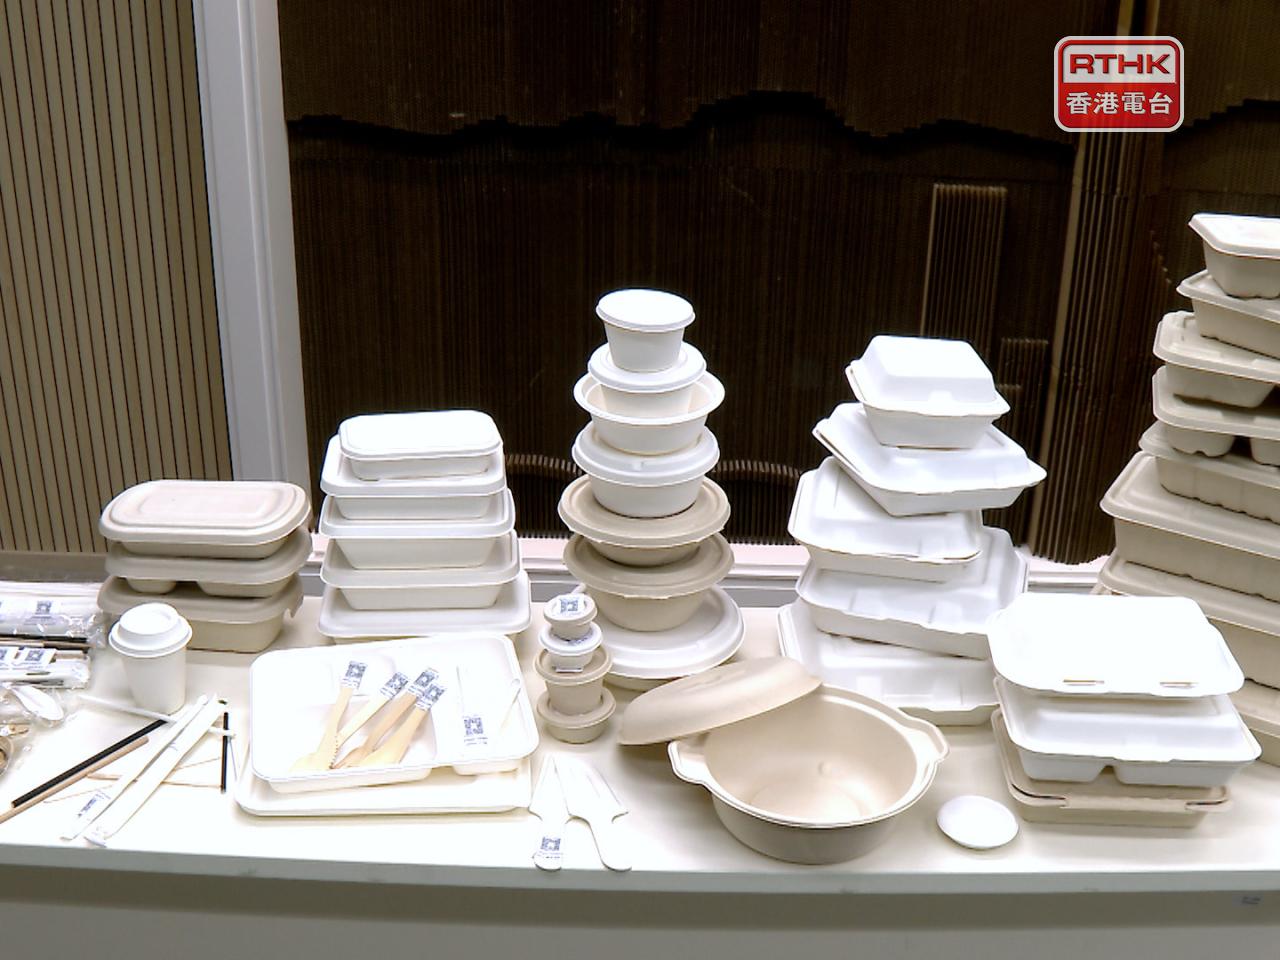 Tableware firms may be urged to provide safety proof